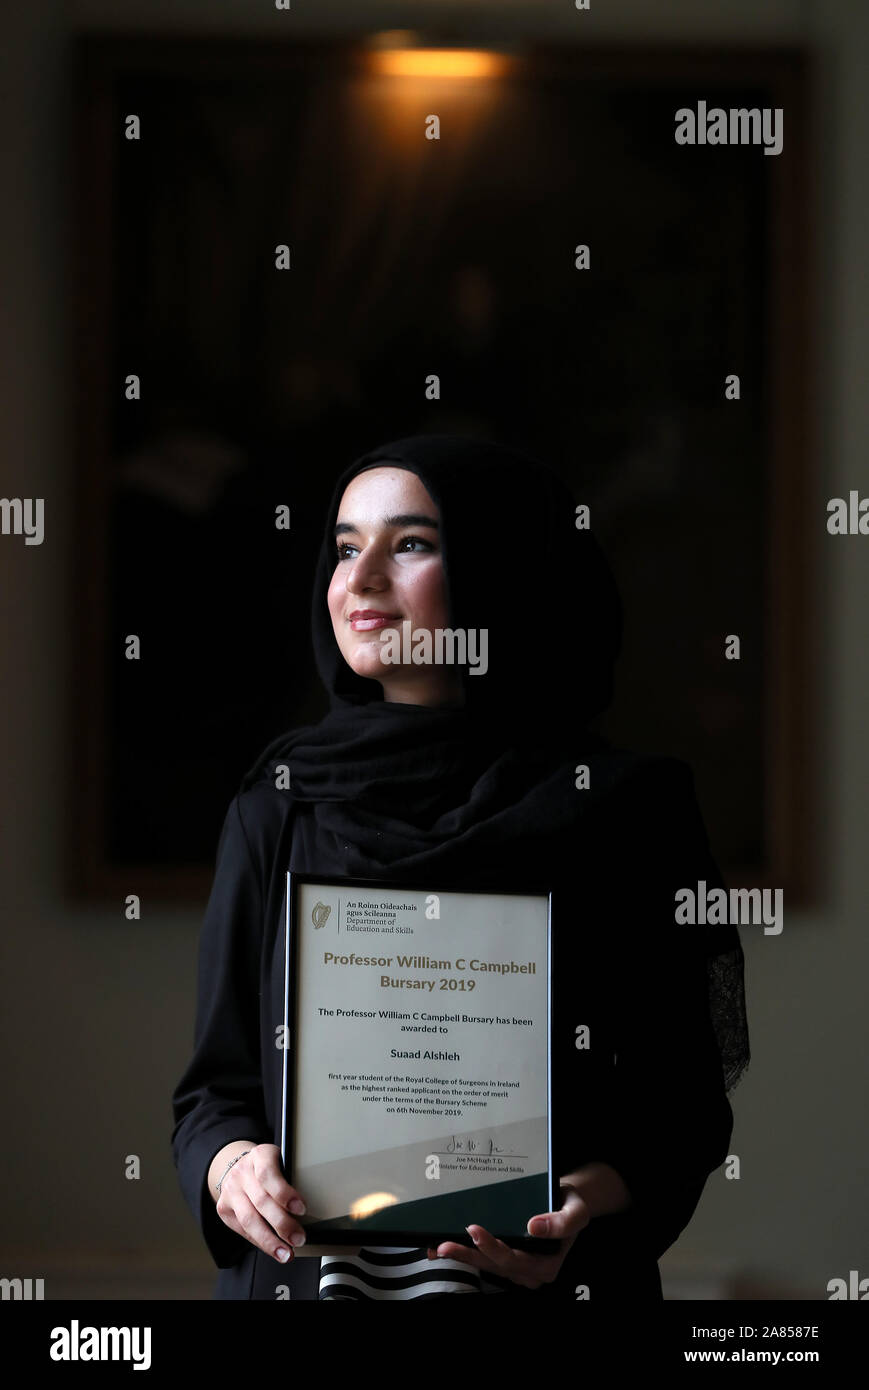 RCSI medical student Suaad Alshleh who was presented with the inaugral Professor William C Campbell Bursary at the Royal College of Surgeons Ireland in Dublin. Stock Photo